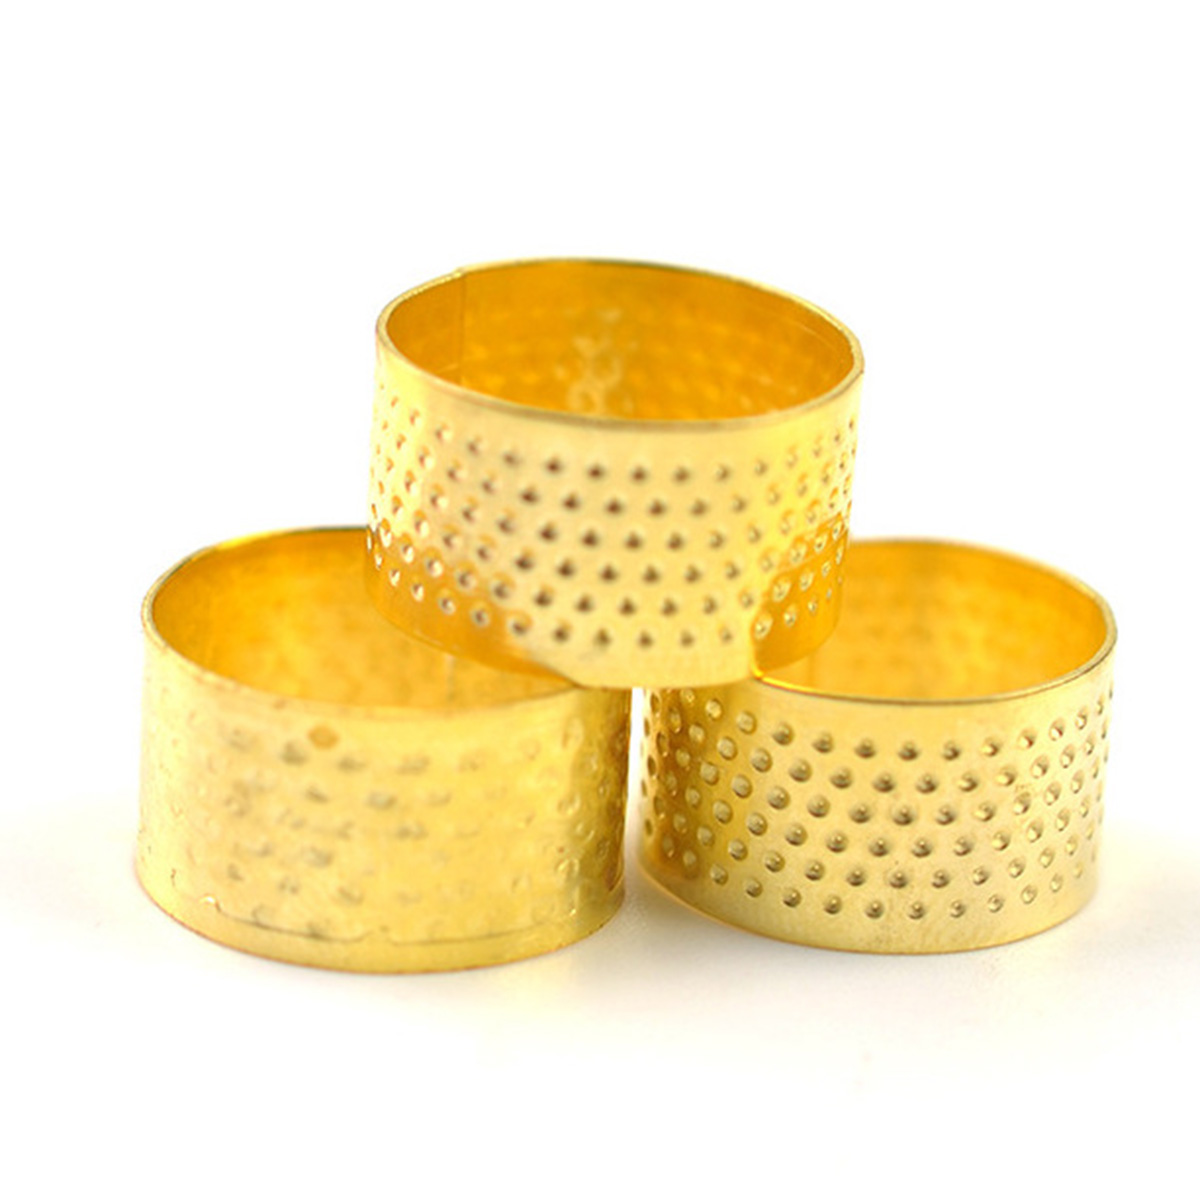 10PCS Copper Sewing Thimbles 16.5mm Inner Dia Golden Protector Shield Ring Cap Suitable Coverage Expandable